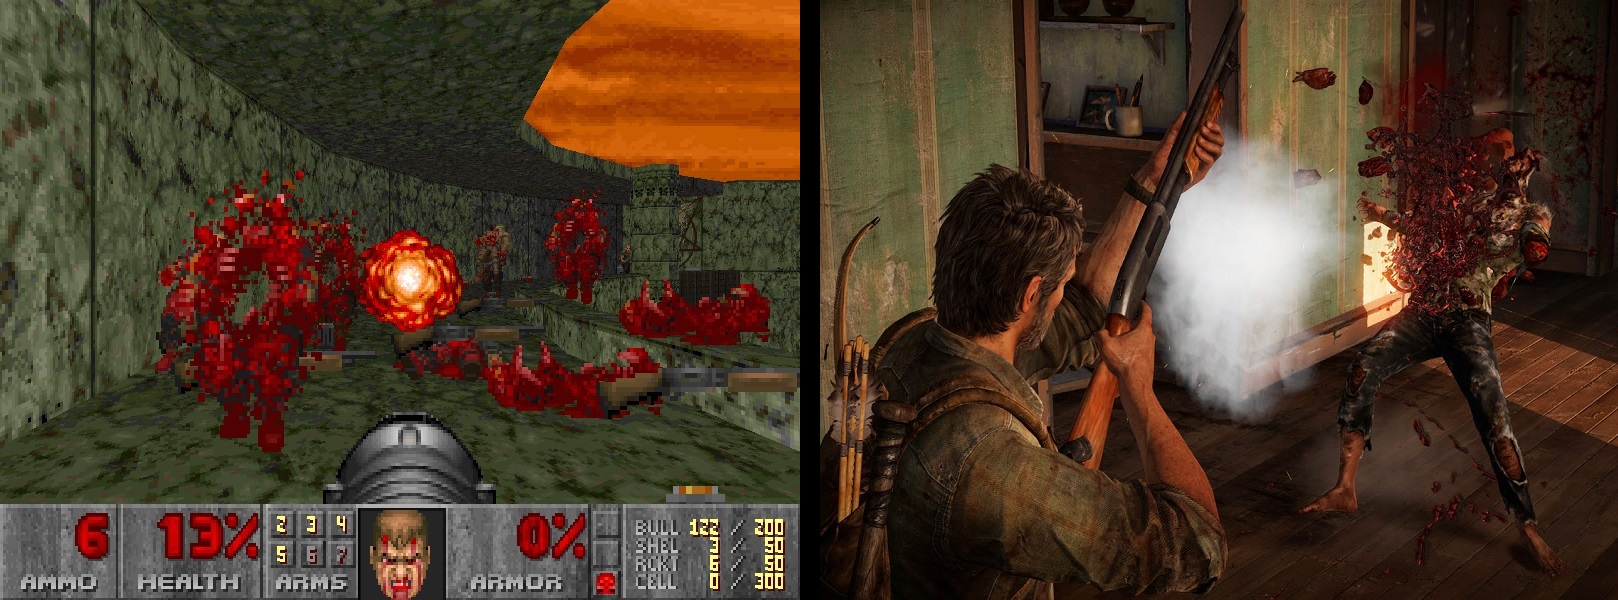 Two decades of violent gaming: from Doom (1993) to The Last Of Us (2013)